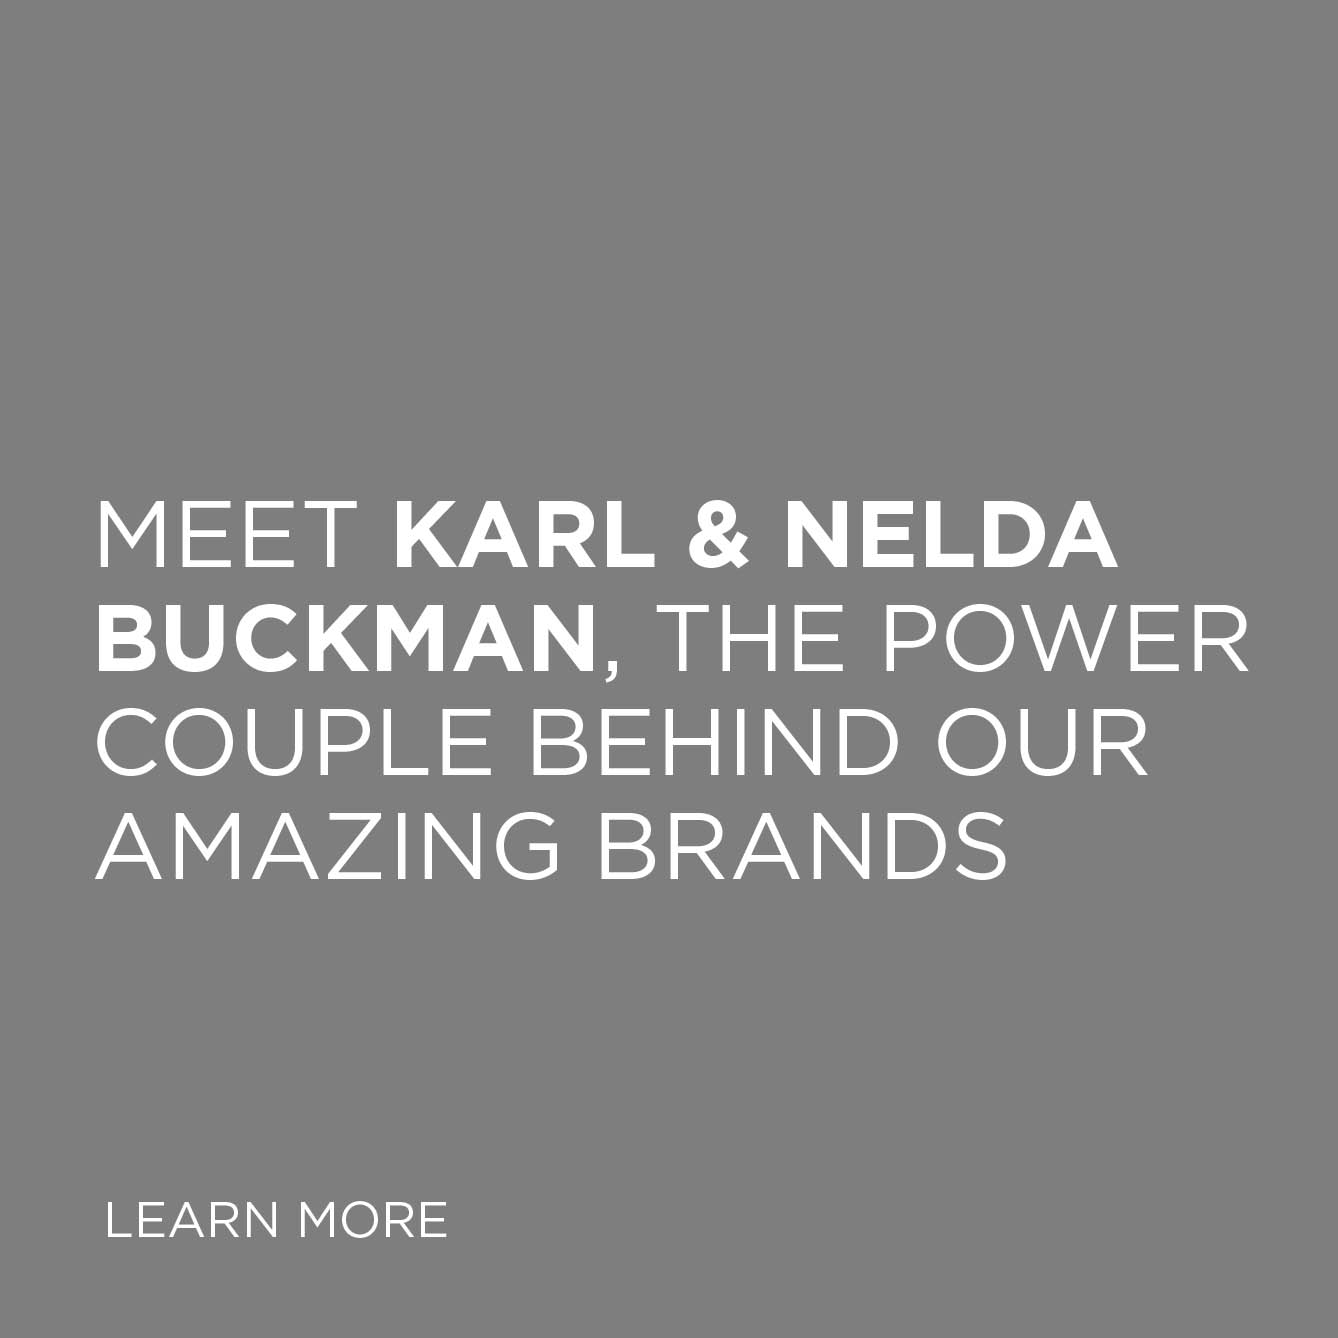 Meet Karl & Nelda Buckman, the power couple behind our amazing brands - learn more